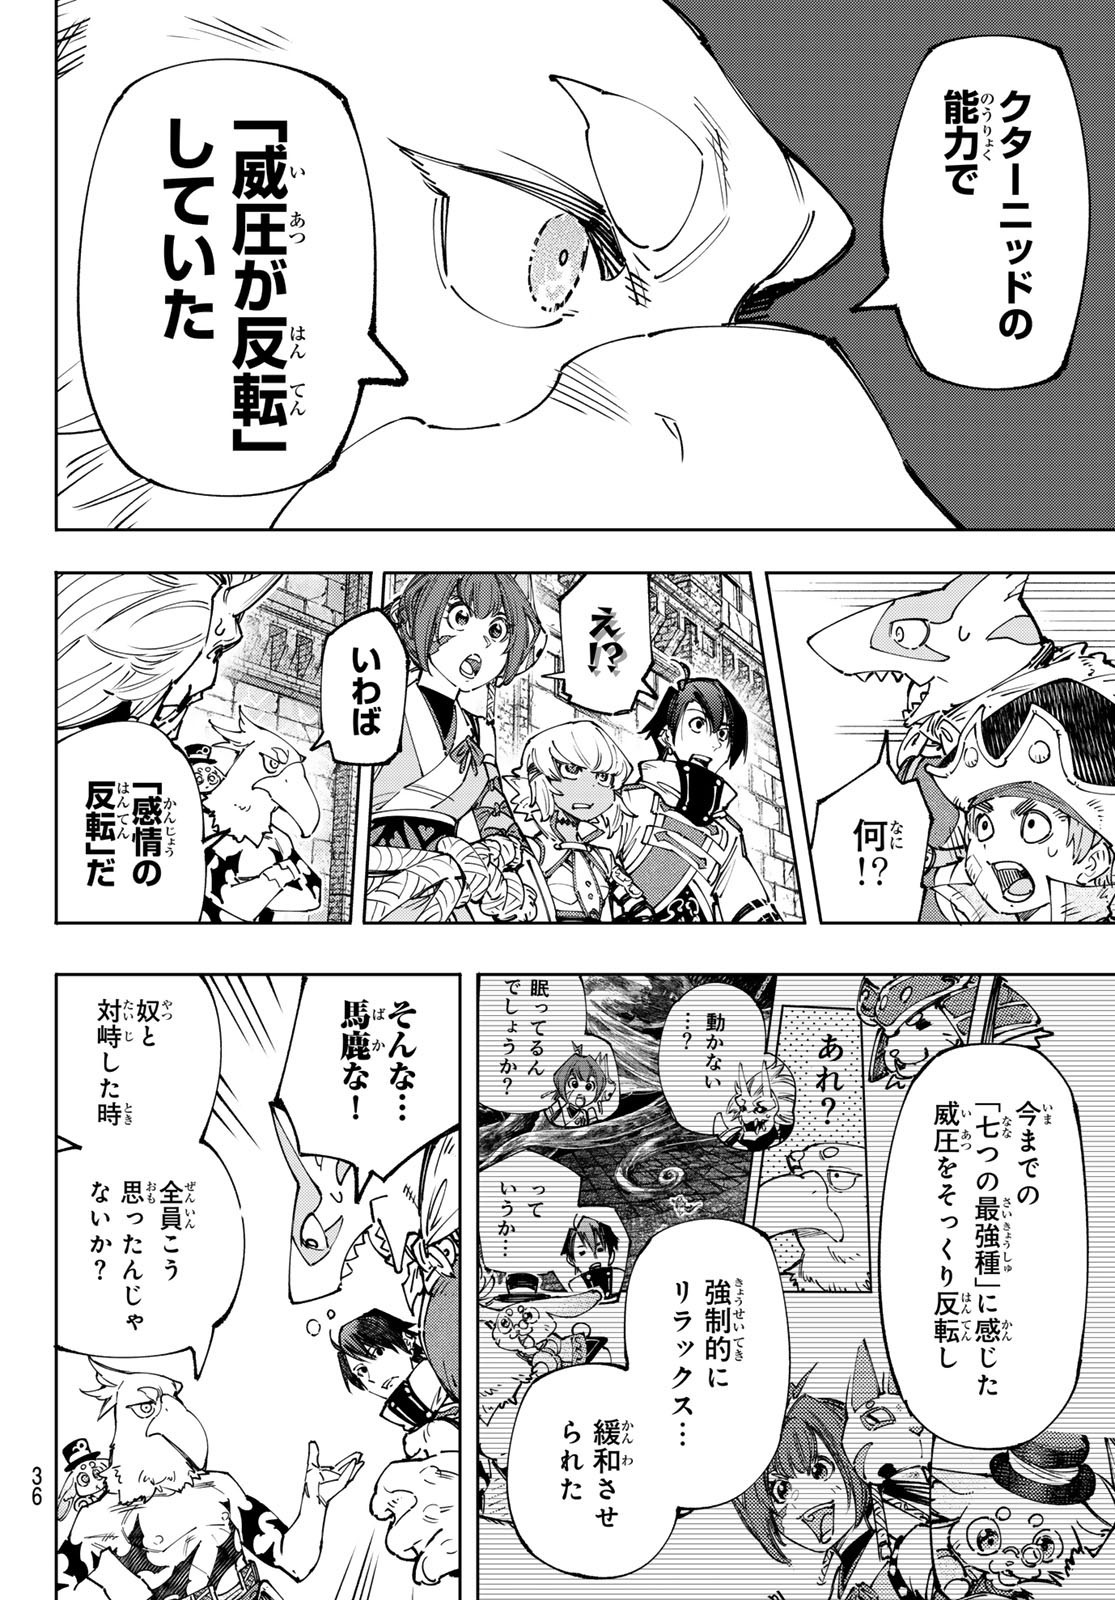 Weekly Shōnen Magazine - 週刊少年マガジン - Chapter 2024-24 - Page 36